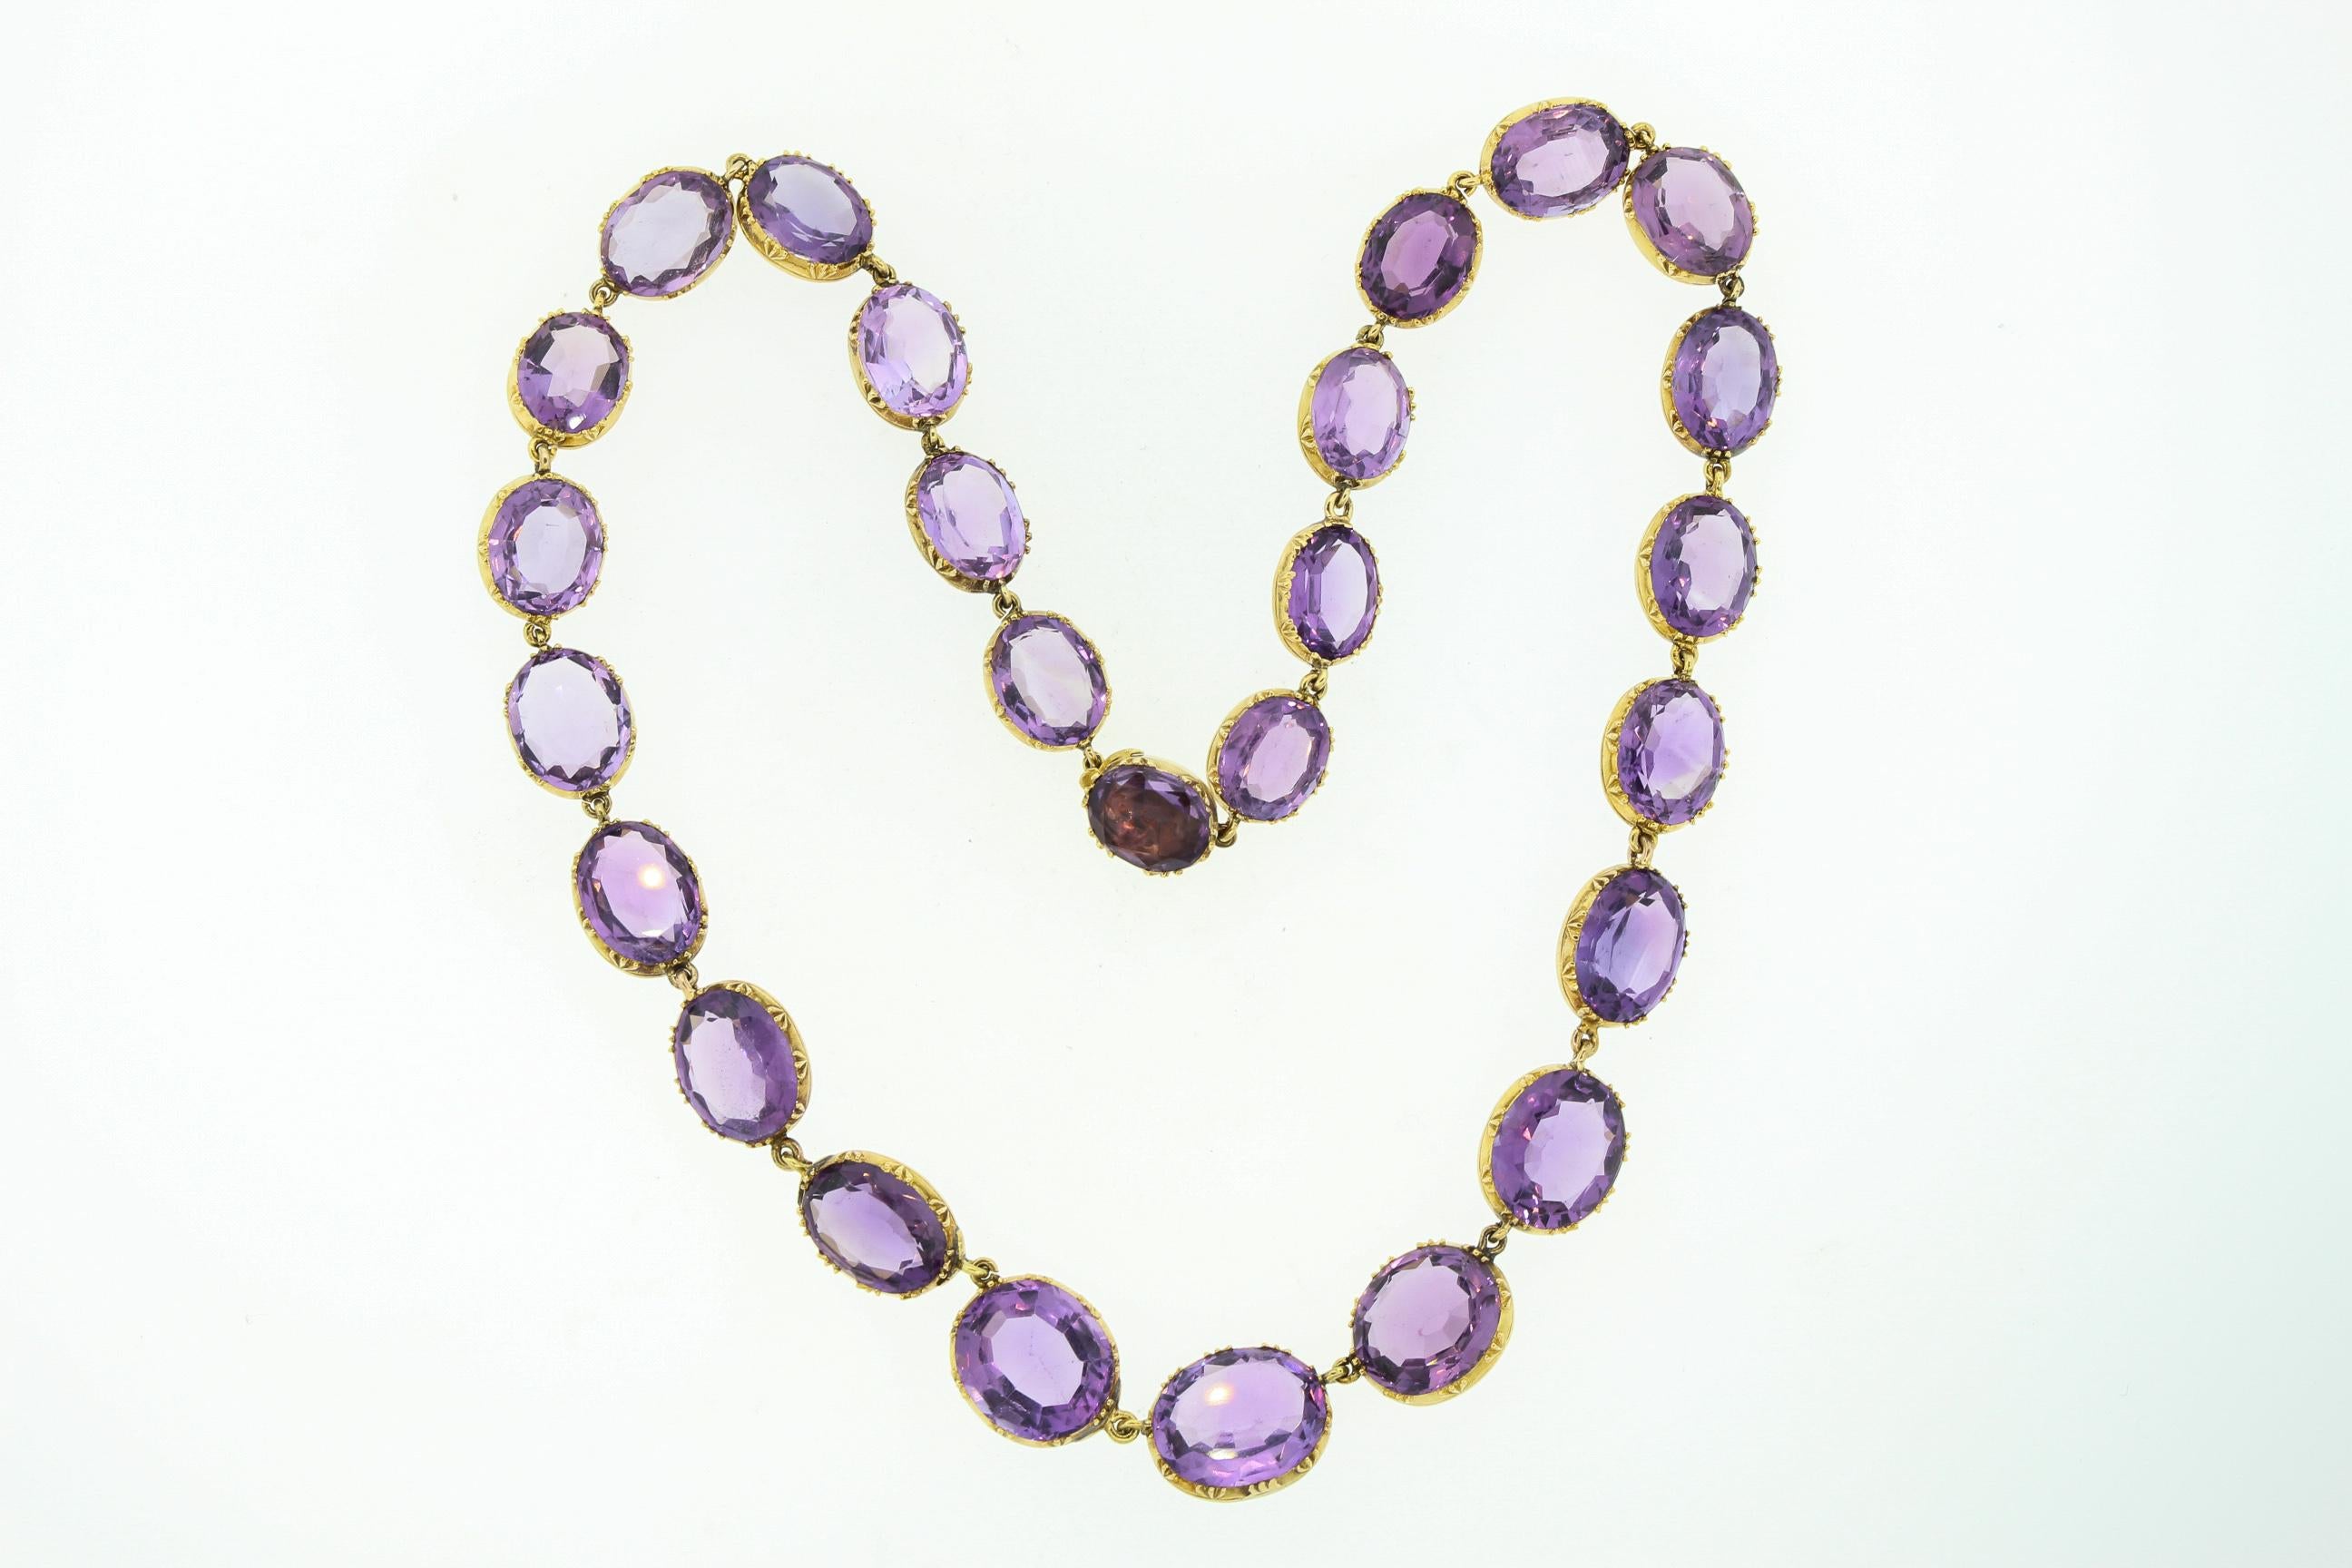 Women's or Men's Antique Late Victorian Gold Amethyst Riviere Necklace